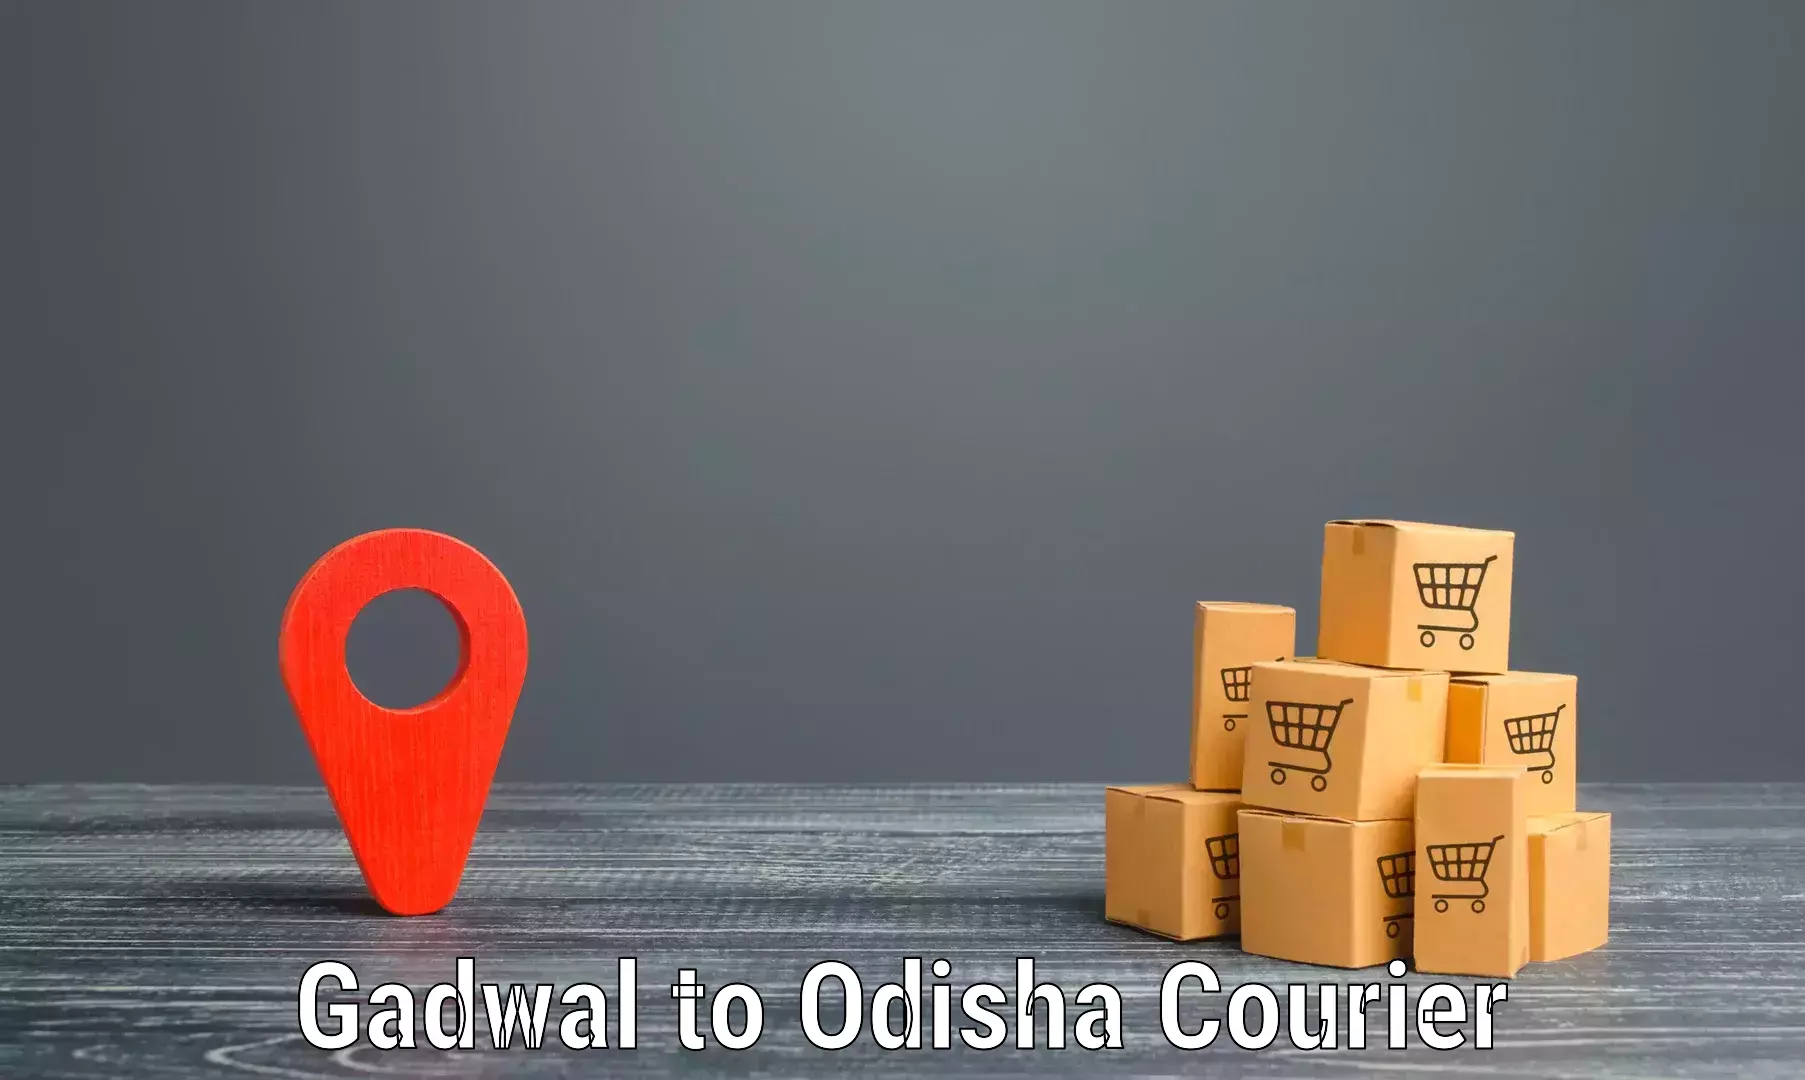 Courier service comparison Gadwal to Asika